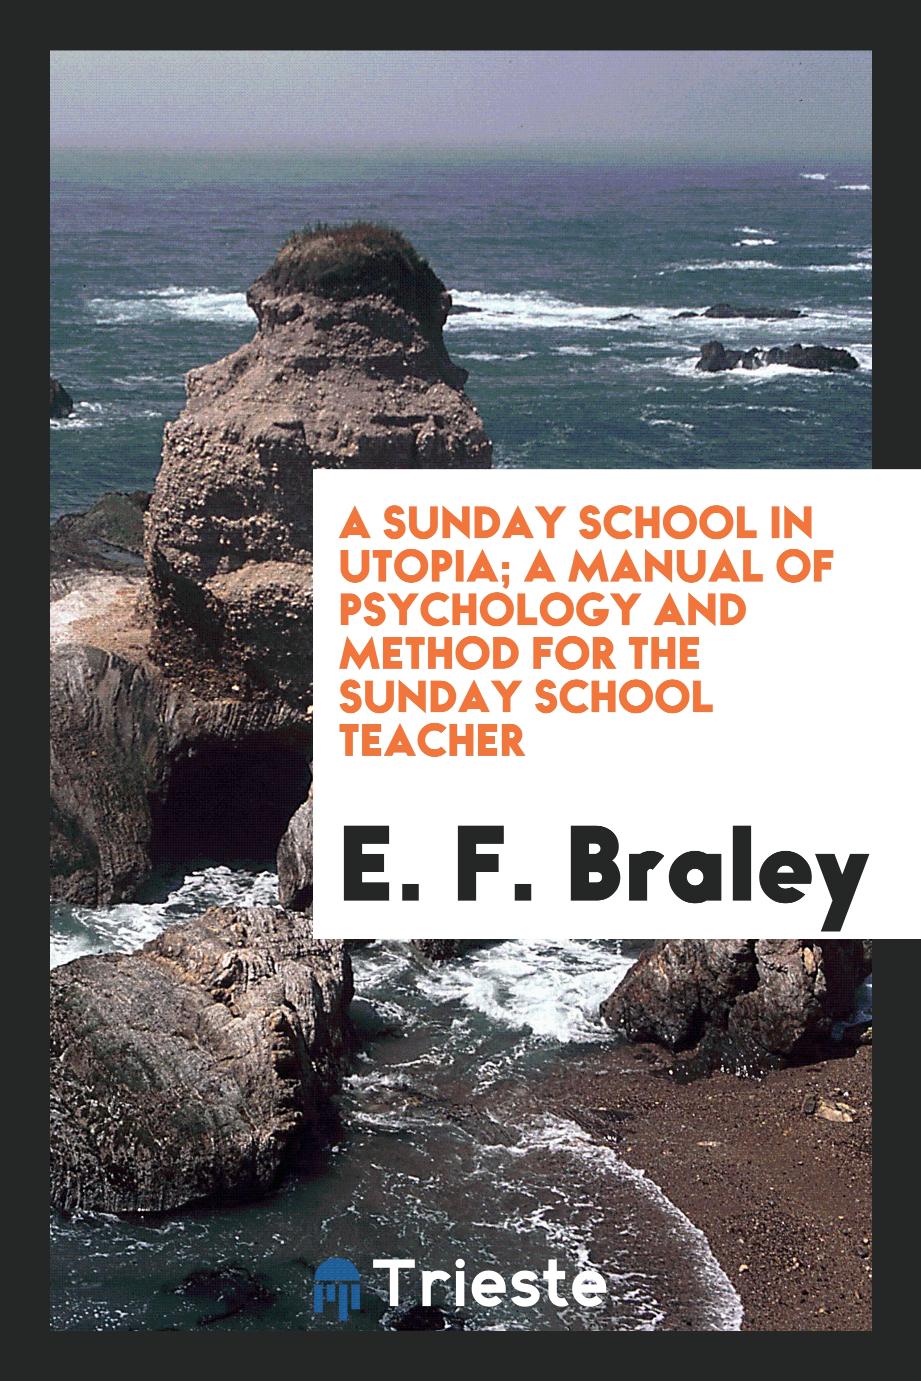 A Sunday school in Utopia; a manual of psychology and method for the Sunday school teacher